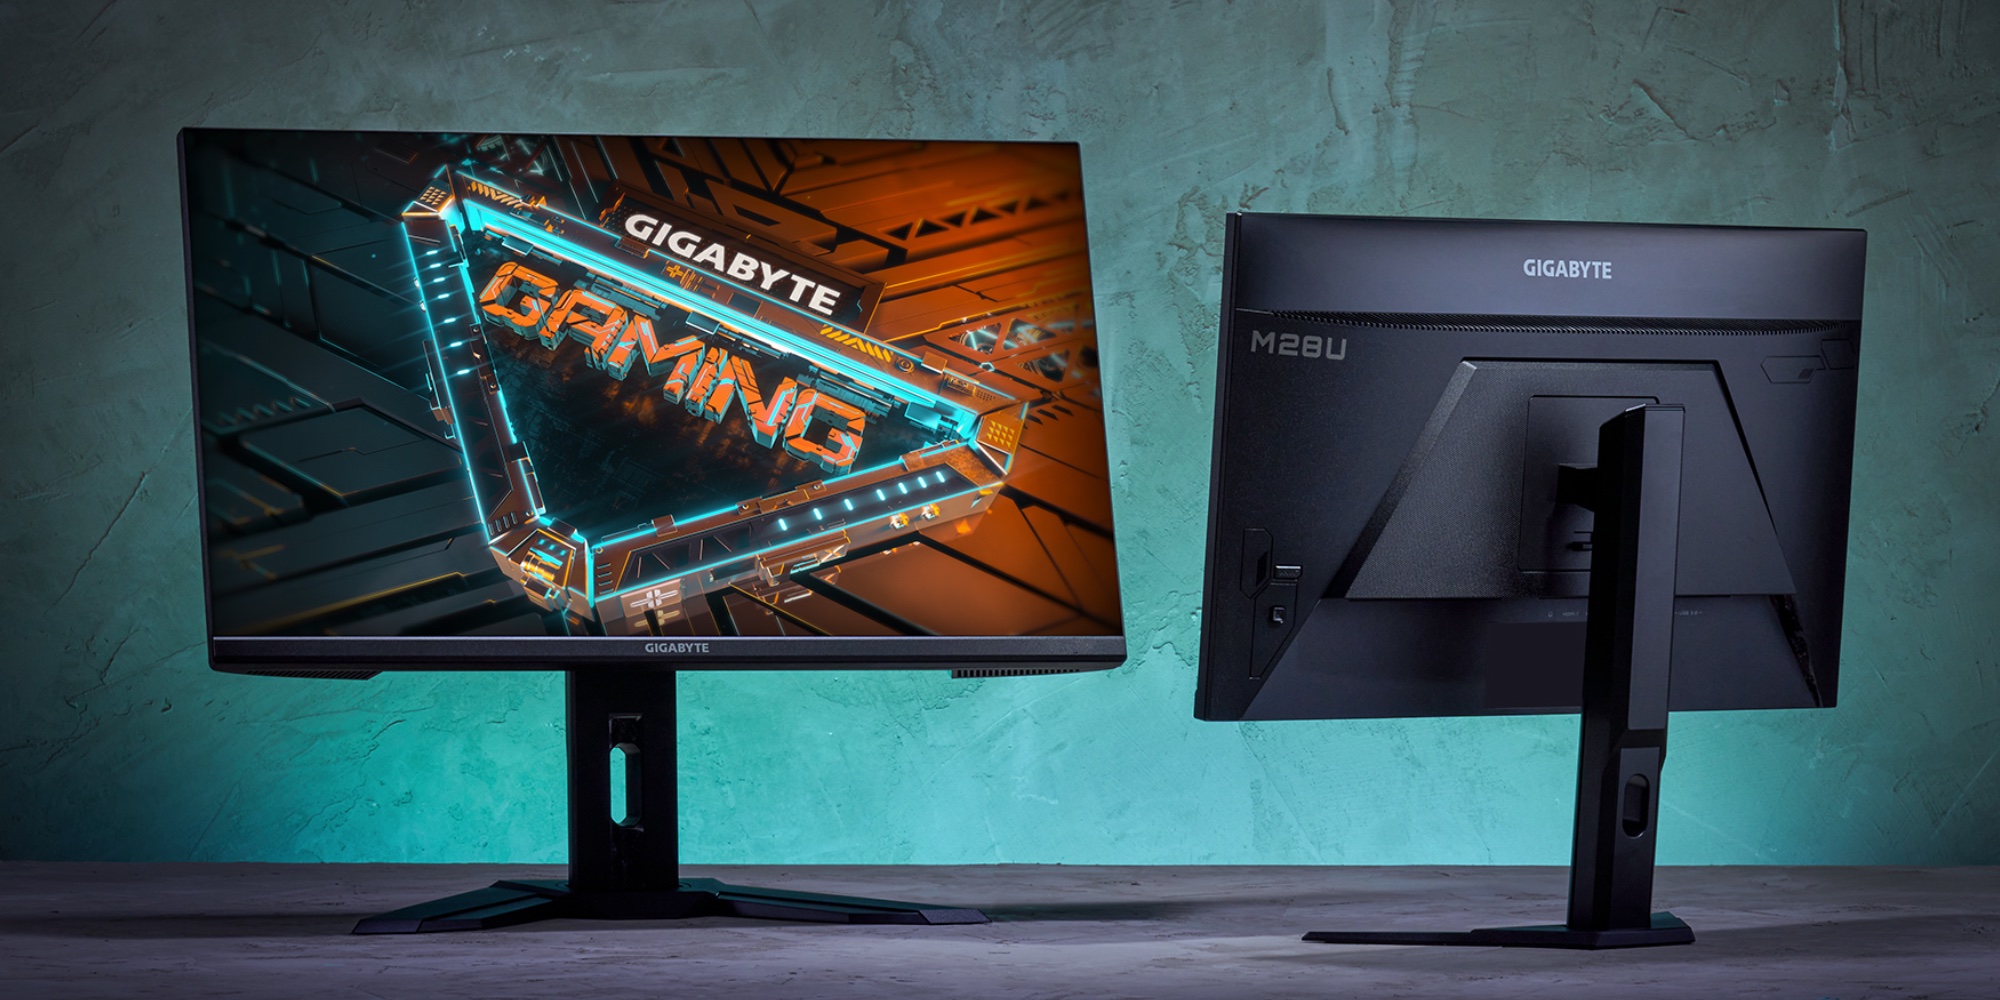 Save $150 on Gigabyte's M28U 28-inch gaming monitor at second